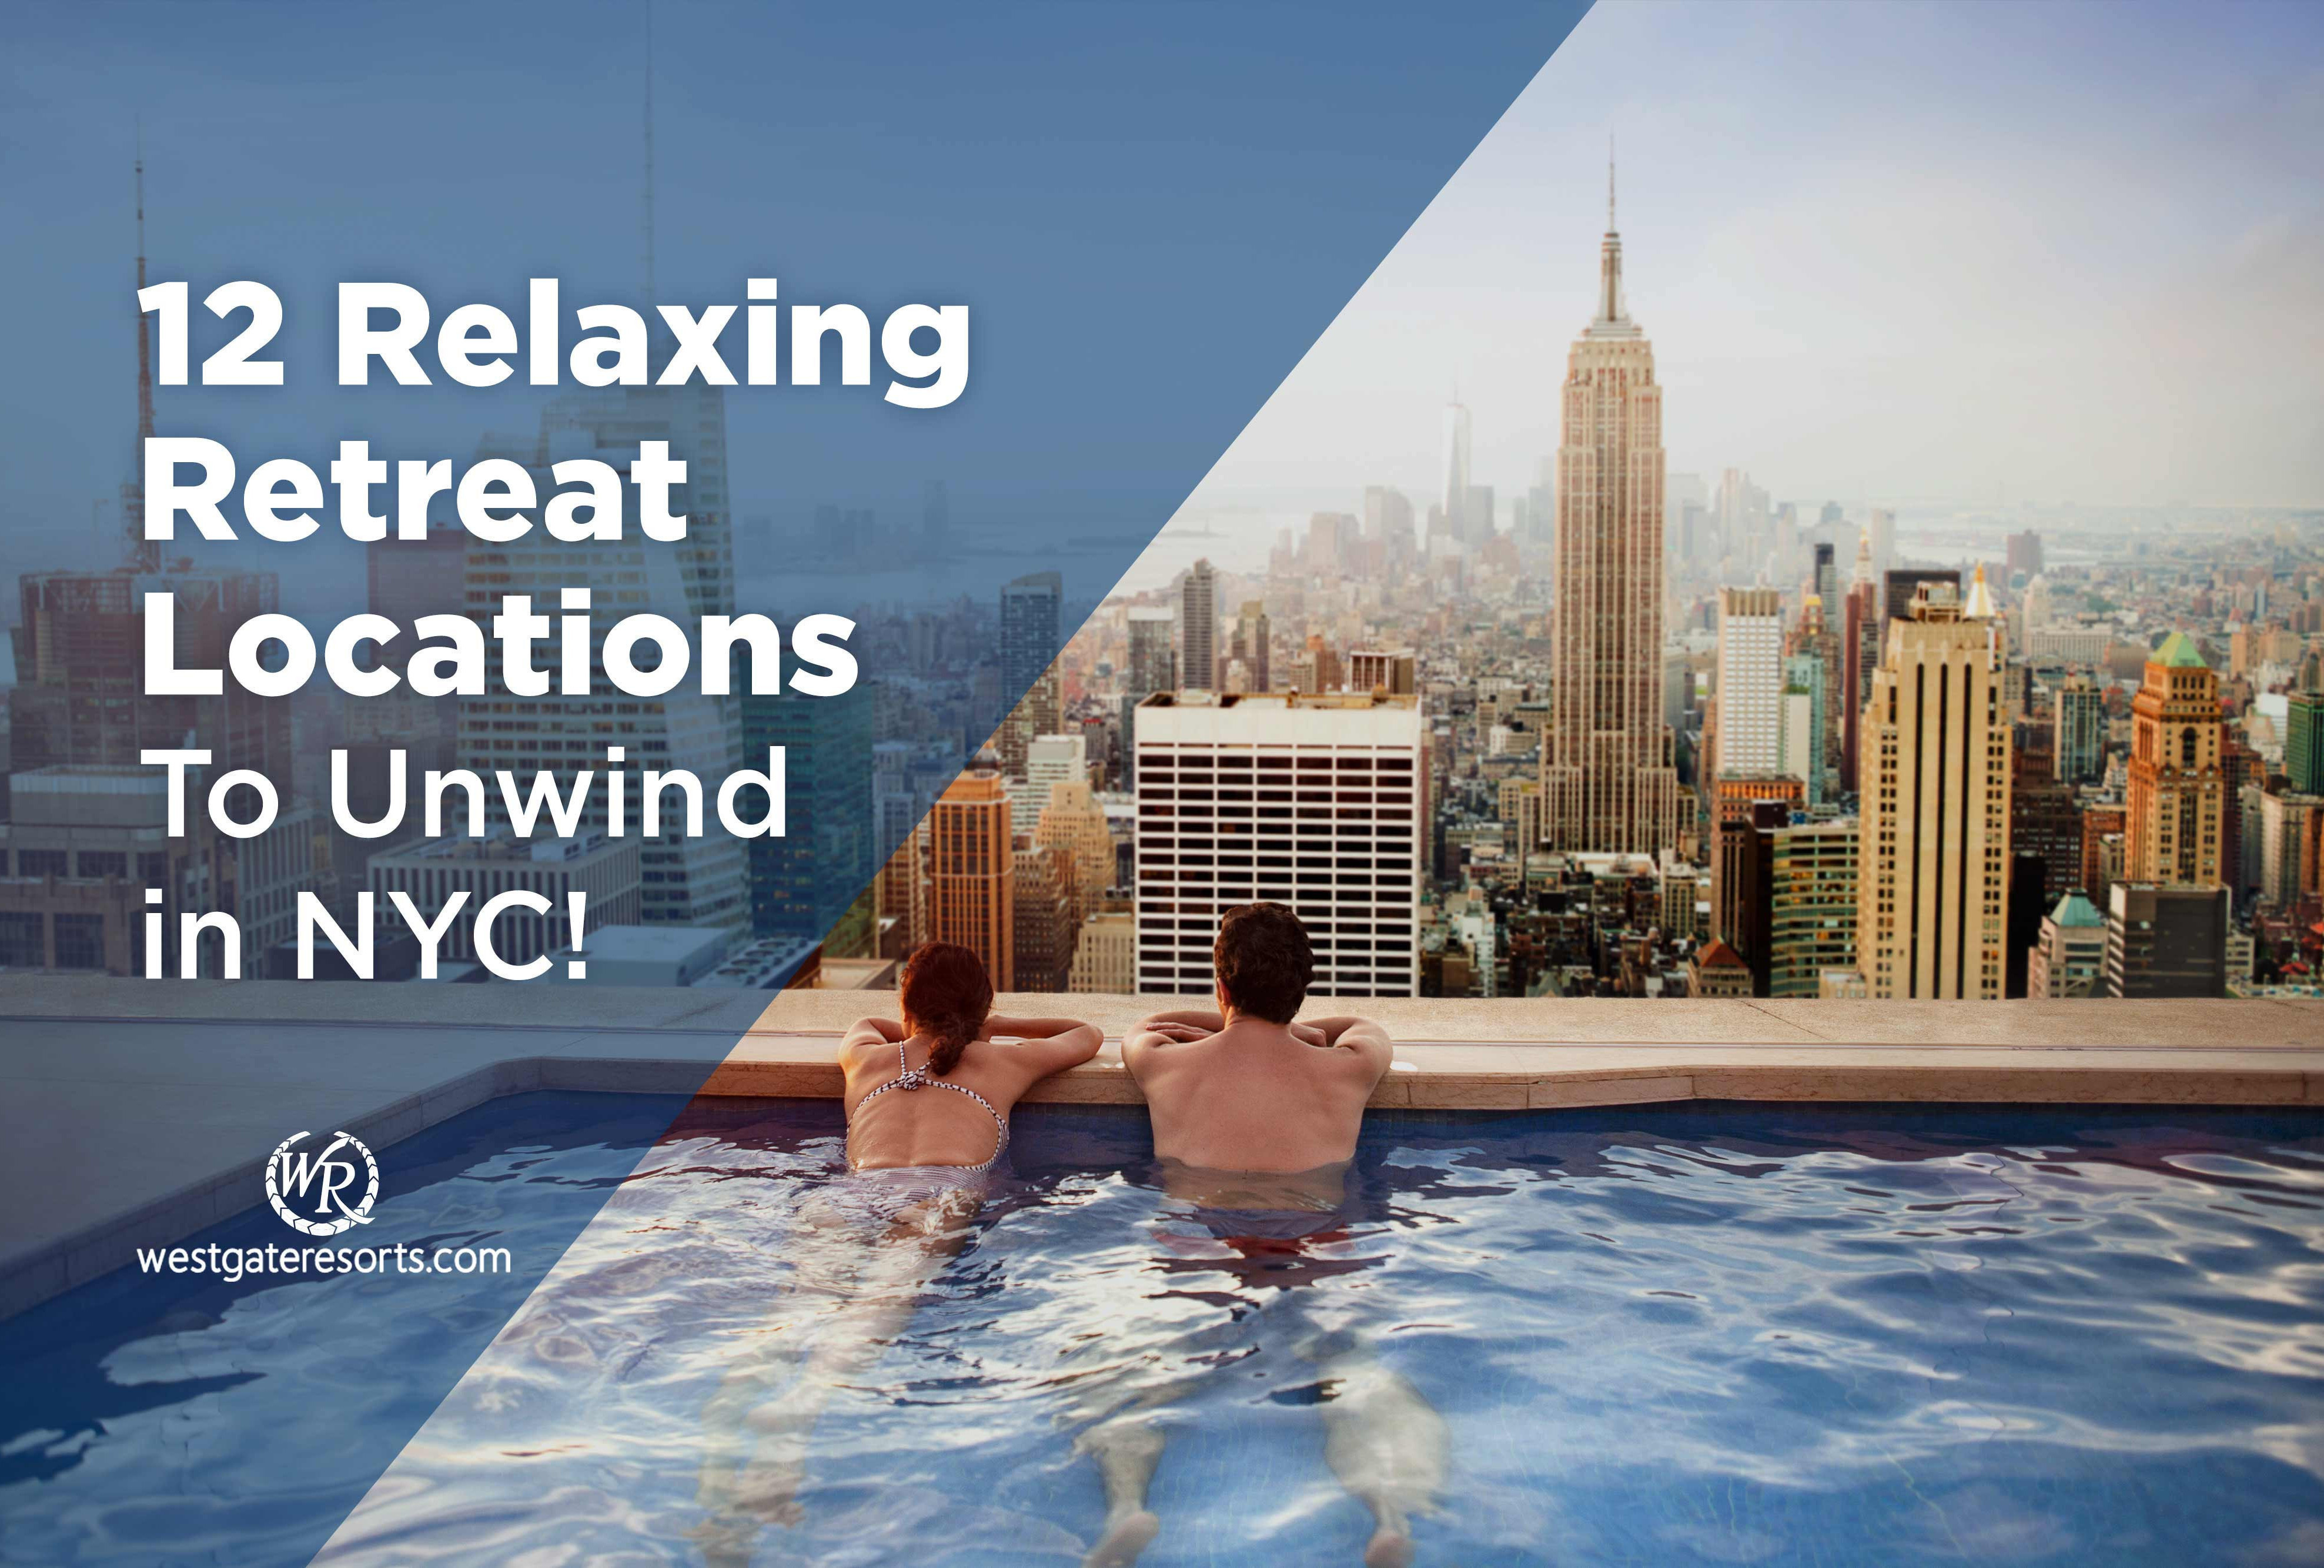 12 Relaxing Retreat Locations To Unwind in NYC! | NYC Retreats And Quiet Spots